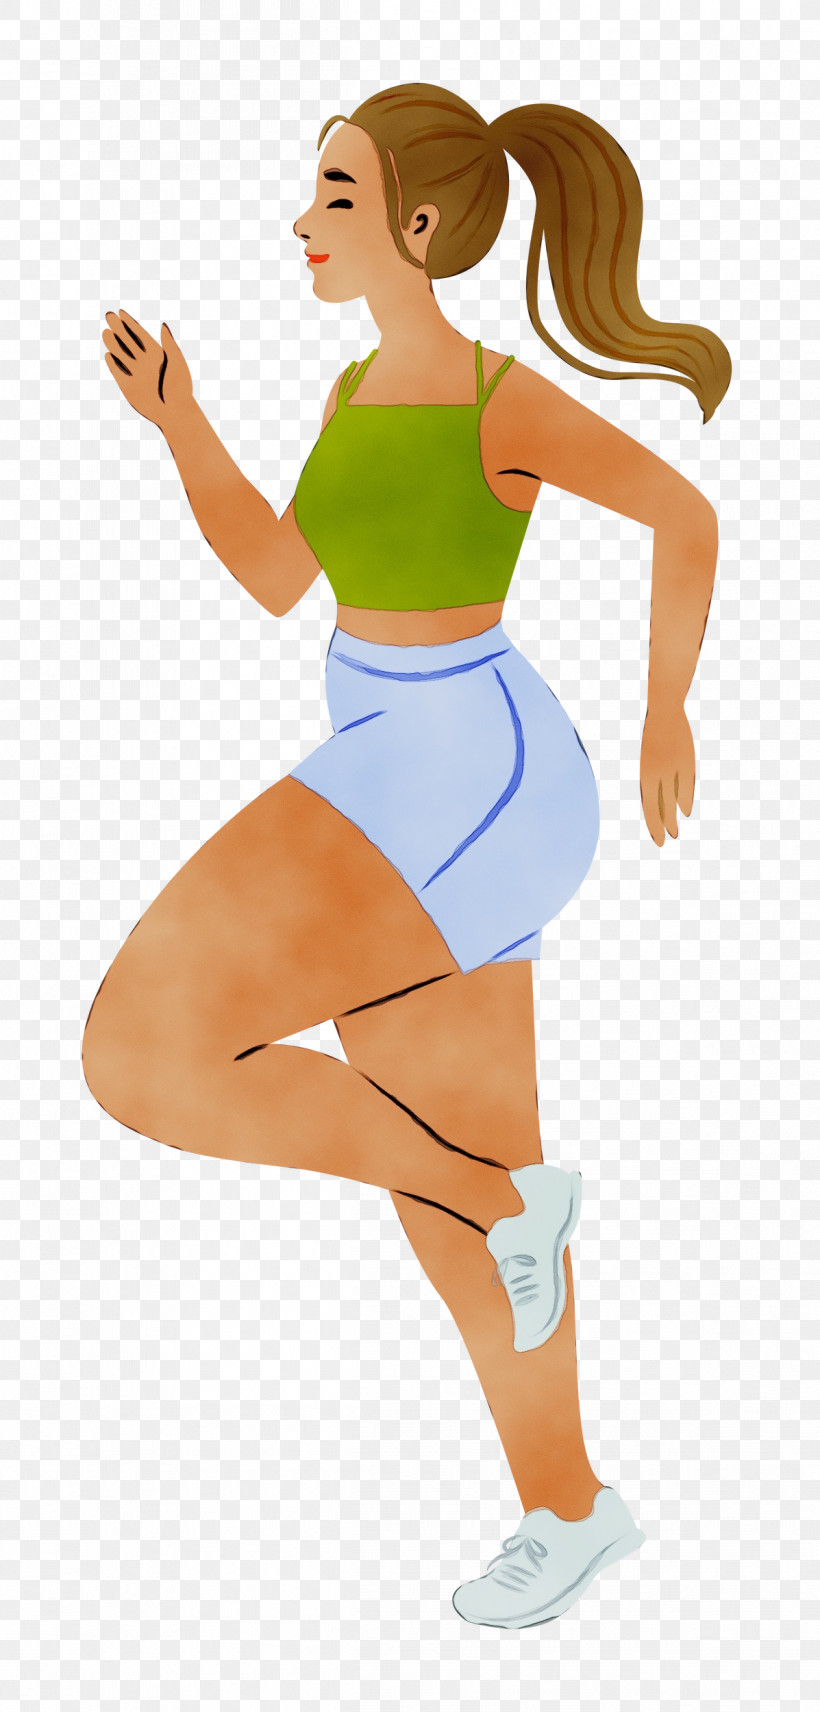 Human Body Exercise Shoe Muscle, PNG, 1197x2500px, Running, Abdomen, Exercise, Girl, Human Body Download Free